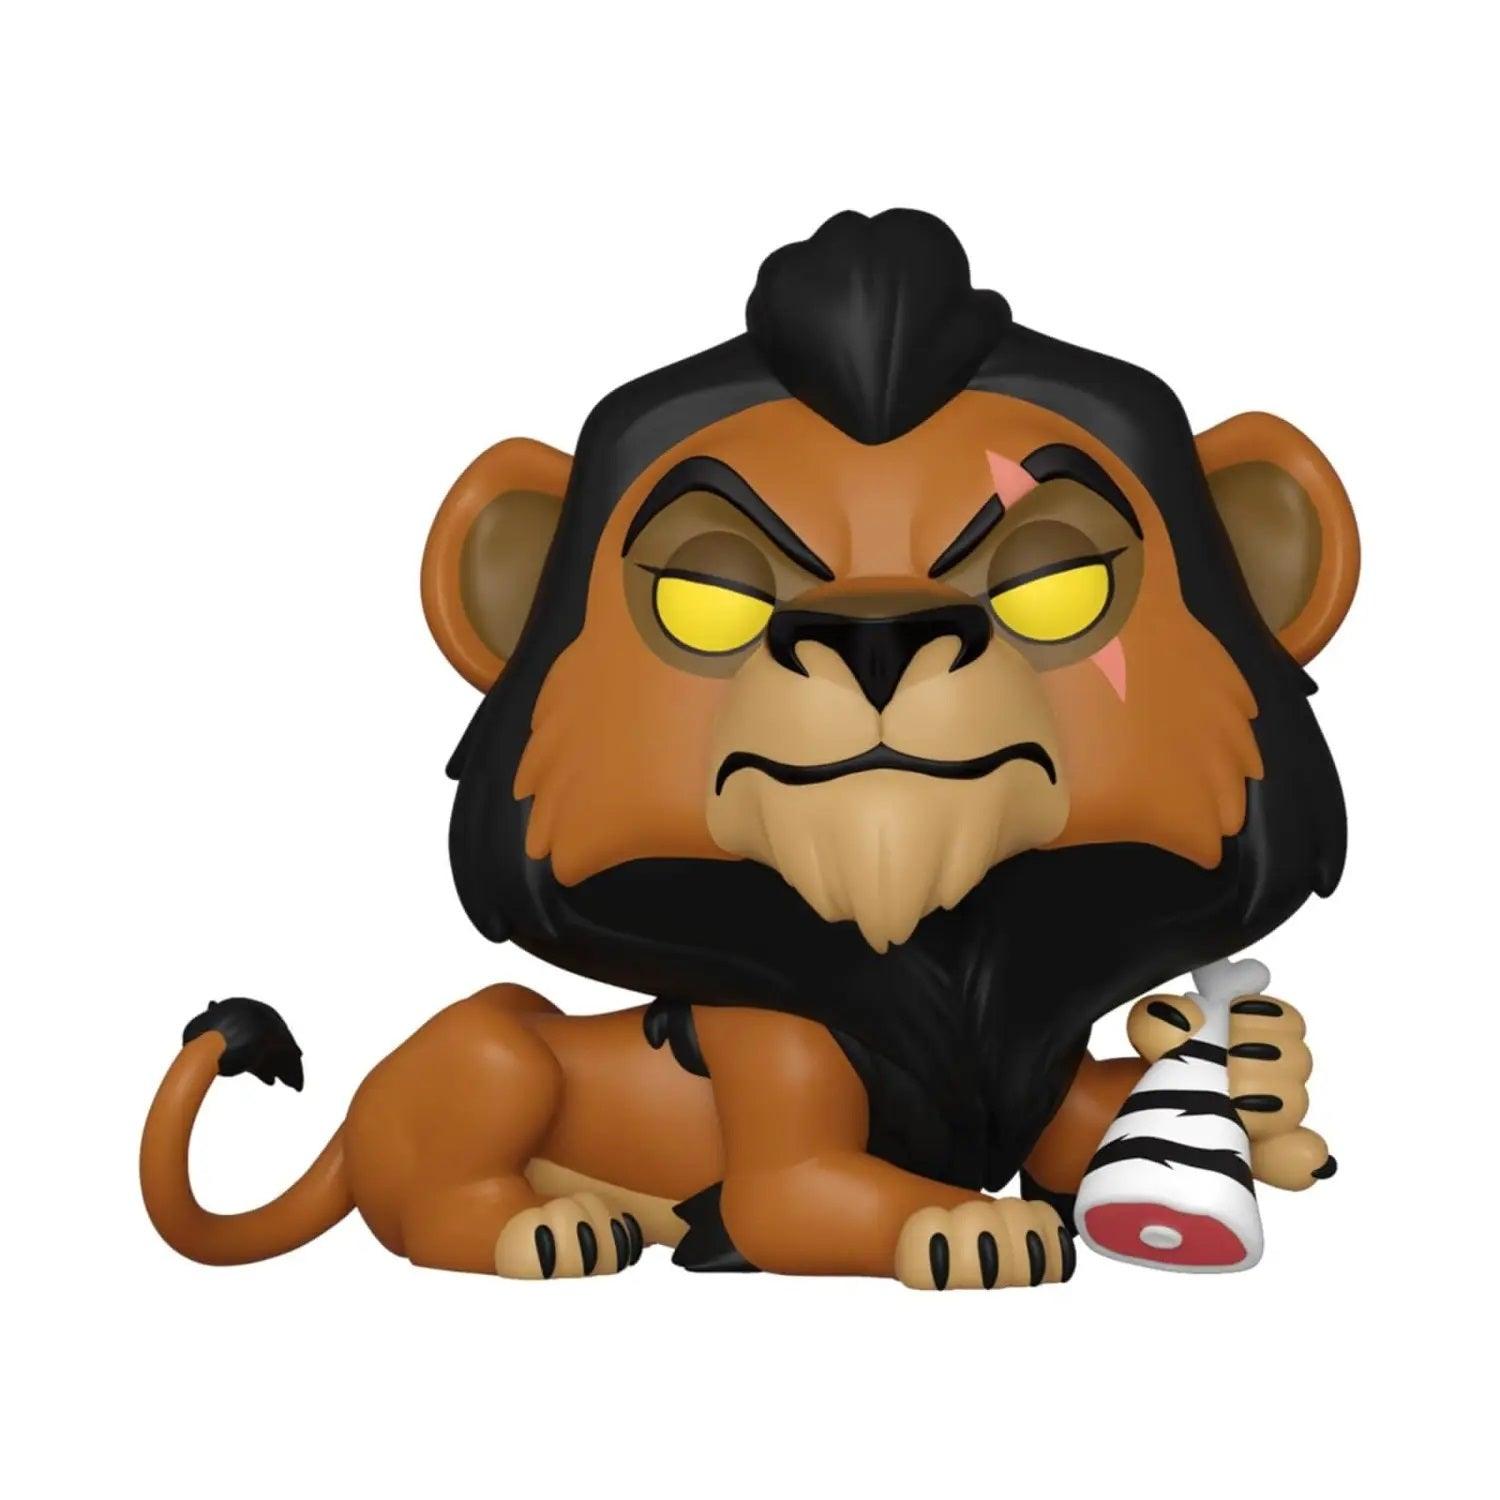 Funko Pop! Disney The Lion King Scar with Meat - BumbleToys - 18+, Action Figures, Boys, Characters, Funko, Girls, Lion King